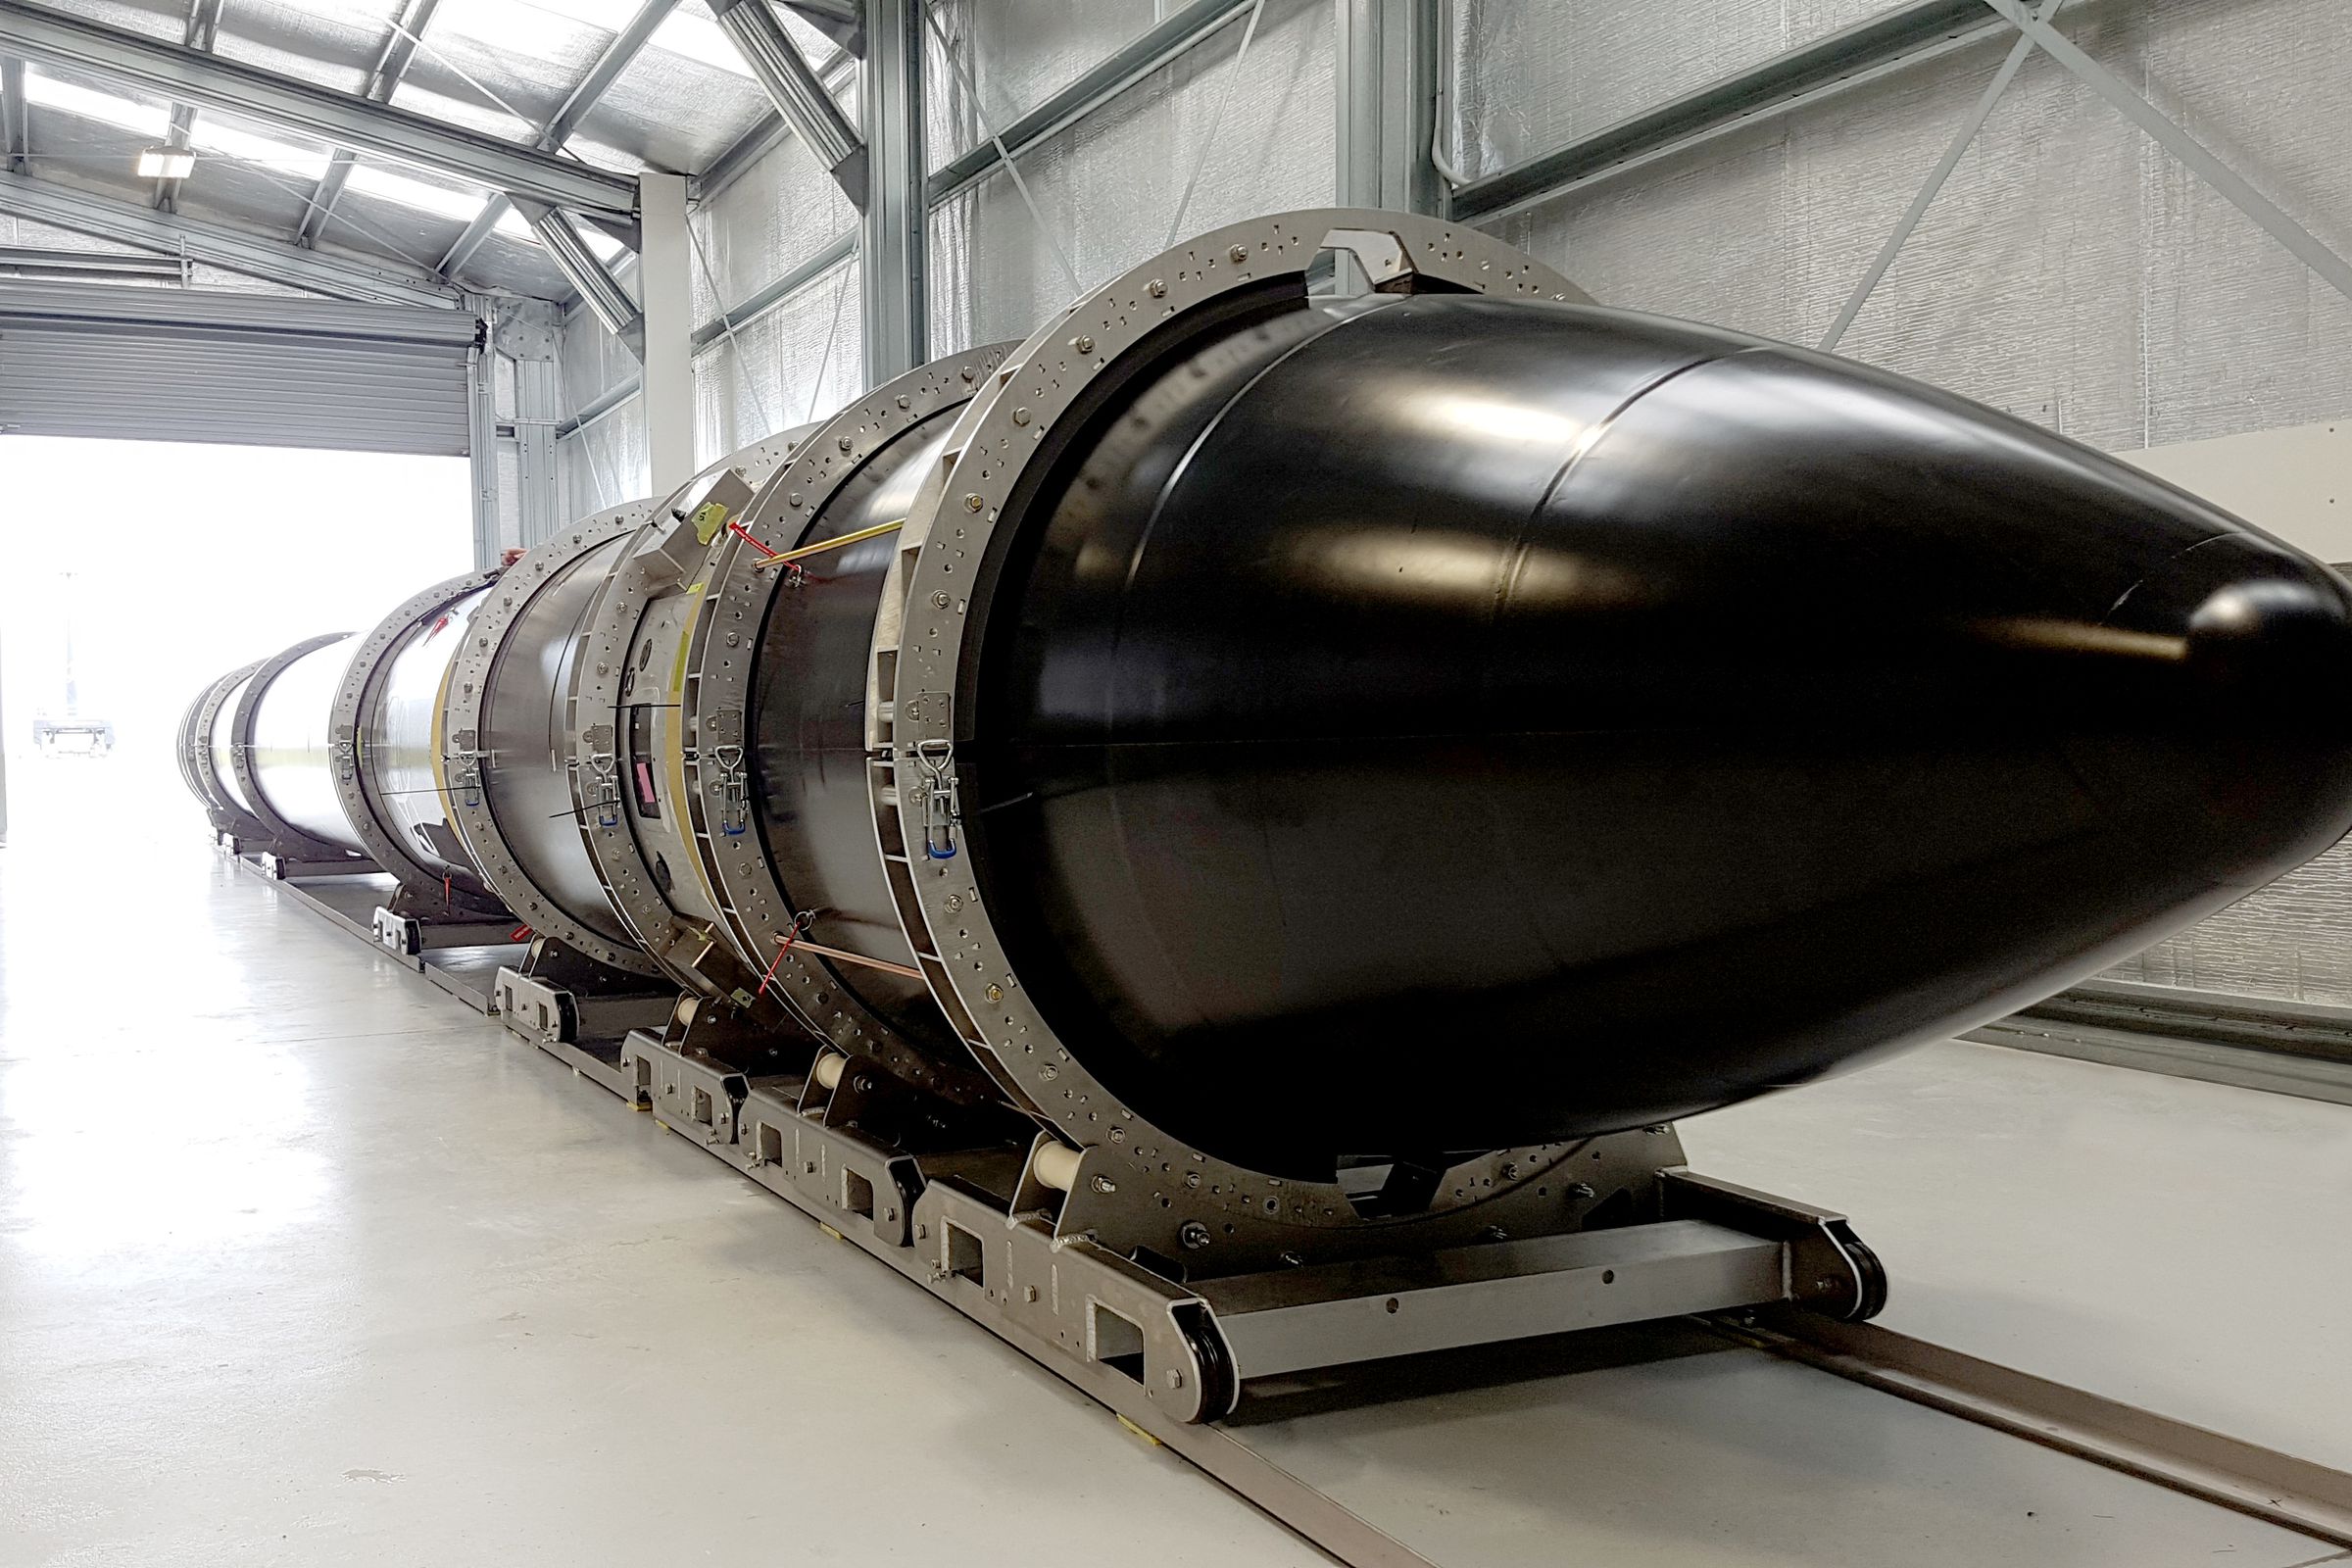 The Electron at Rocket Lab’s Launch Complex 1 in New Zealand.